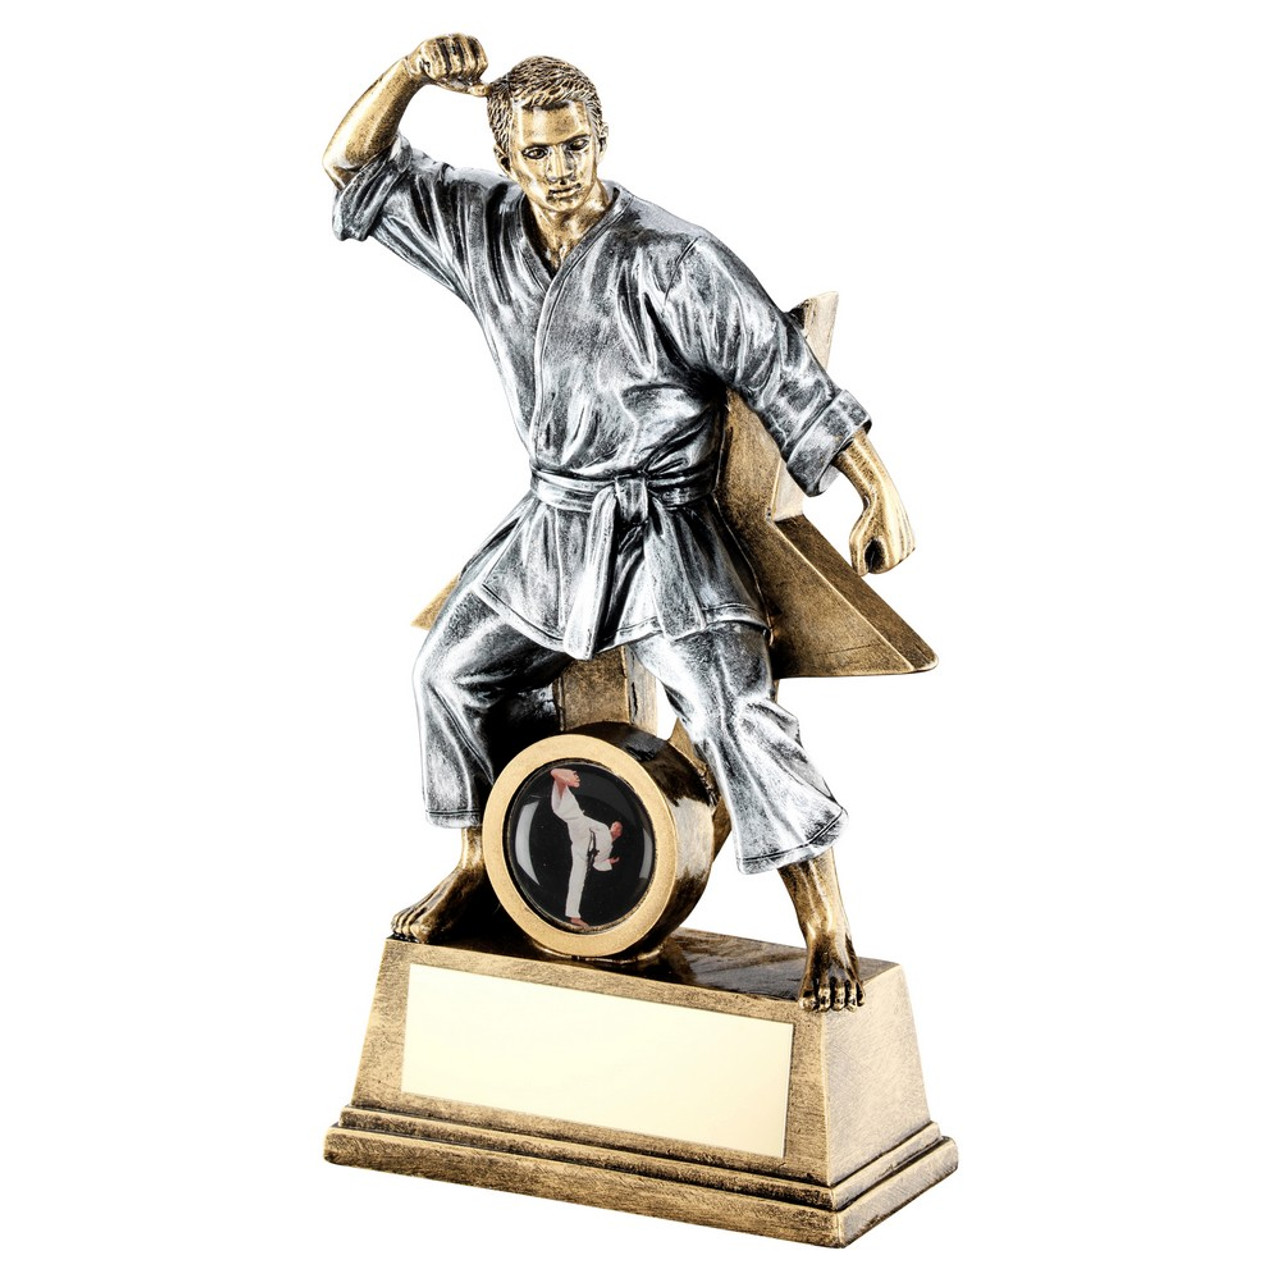 Martial Arts Award in 3 sizes with FREE engraving